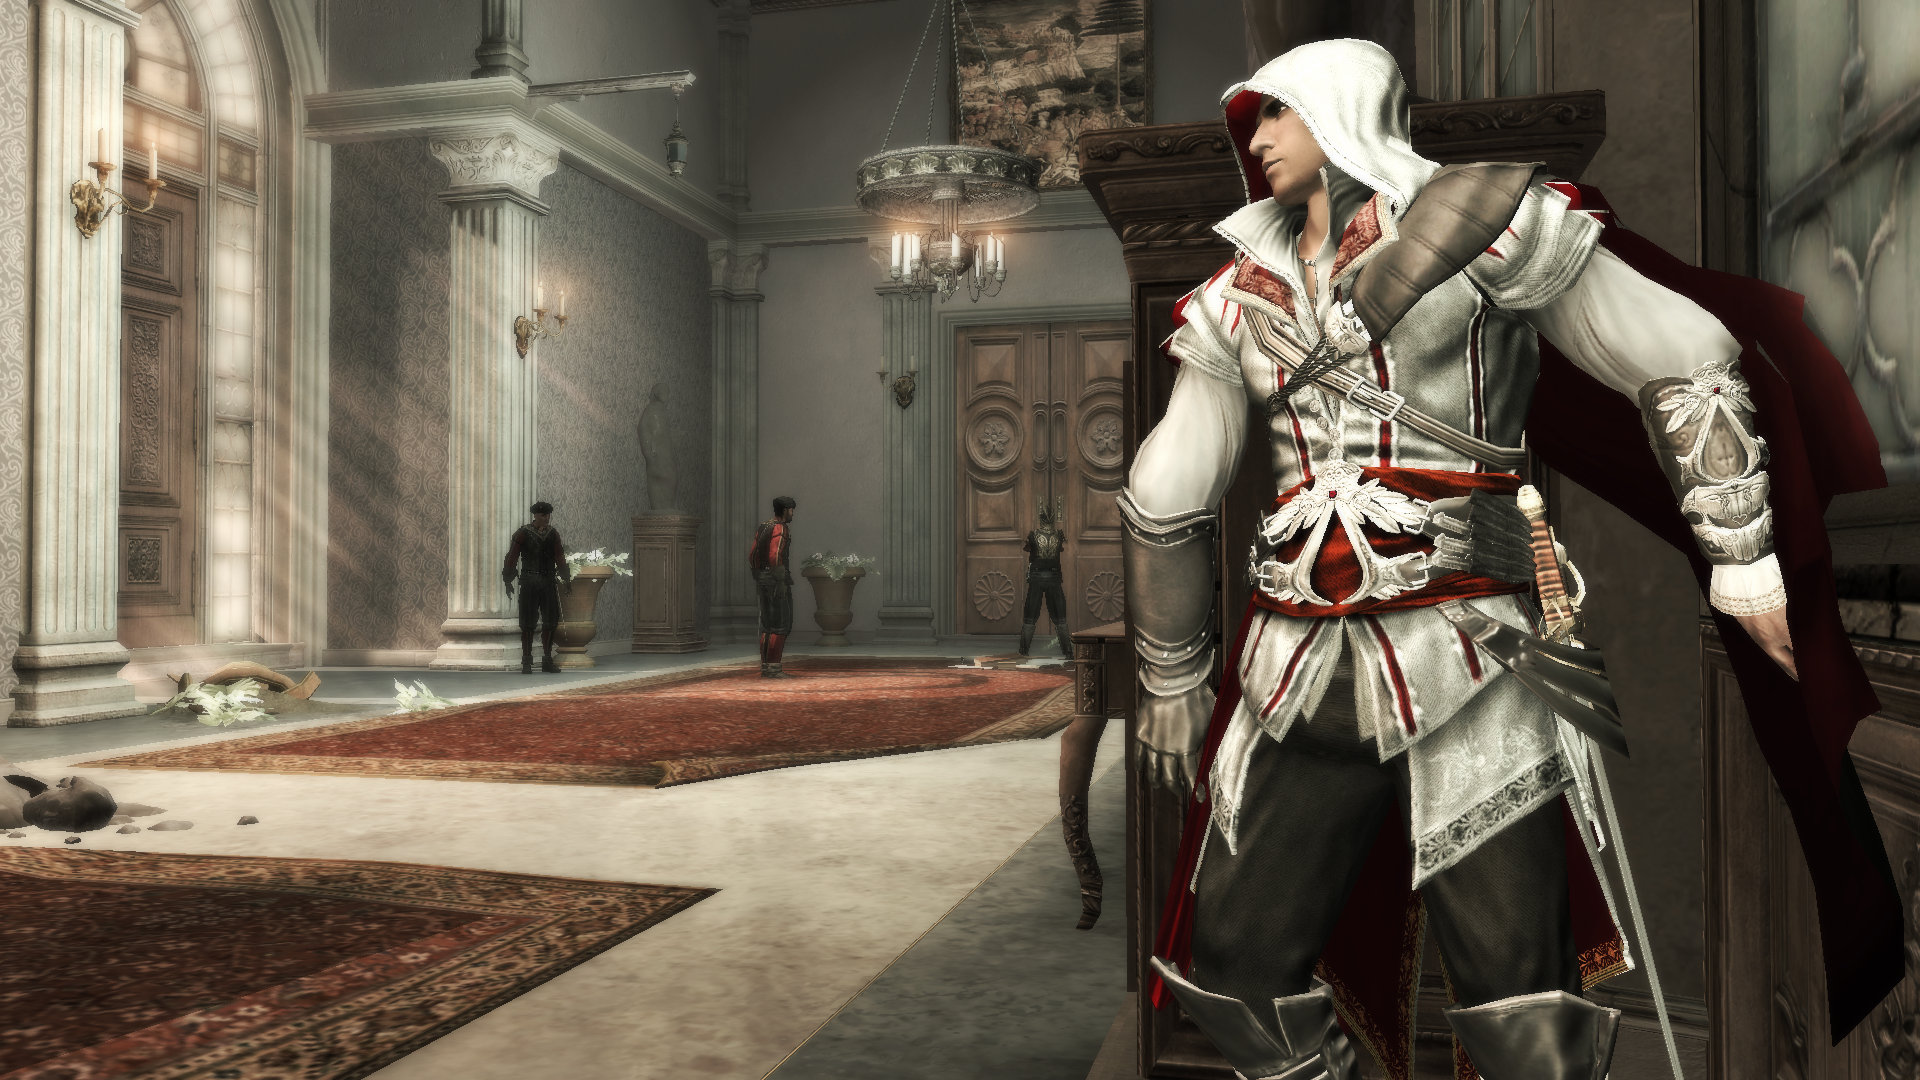 Assassin's Creed 2 - All Assassins' Tombs [Plus 2 Secret Areas each] 